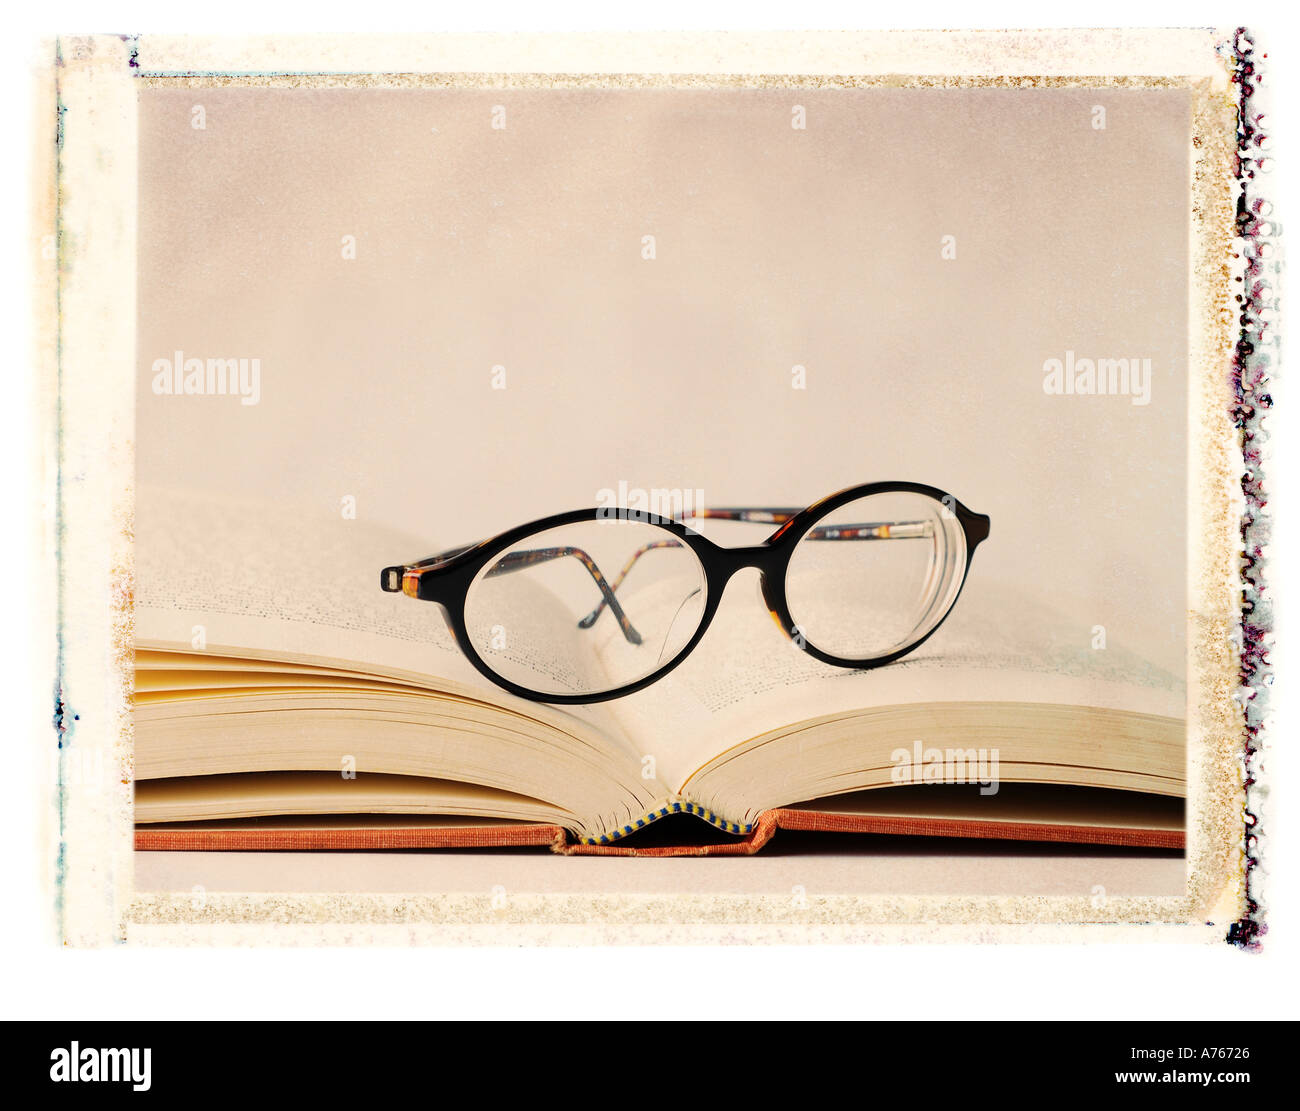 eye glasses sitting on an open book Stock Photo